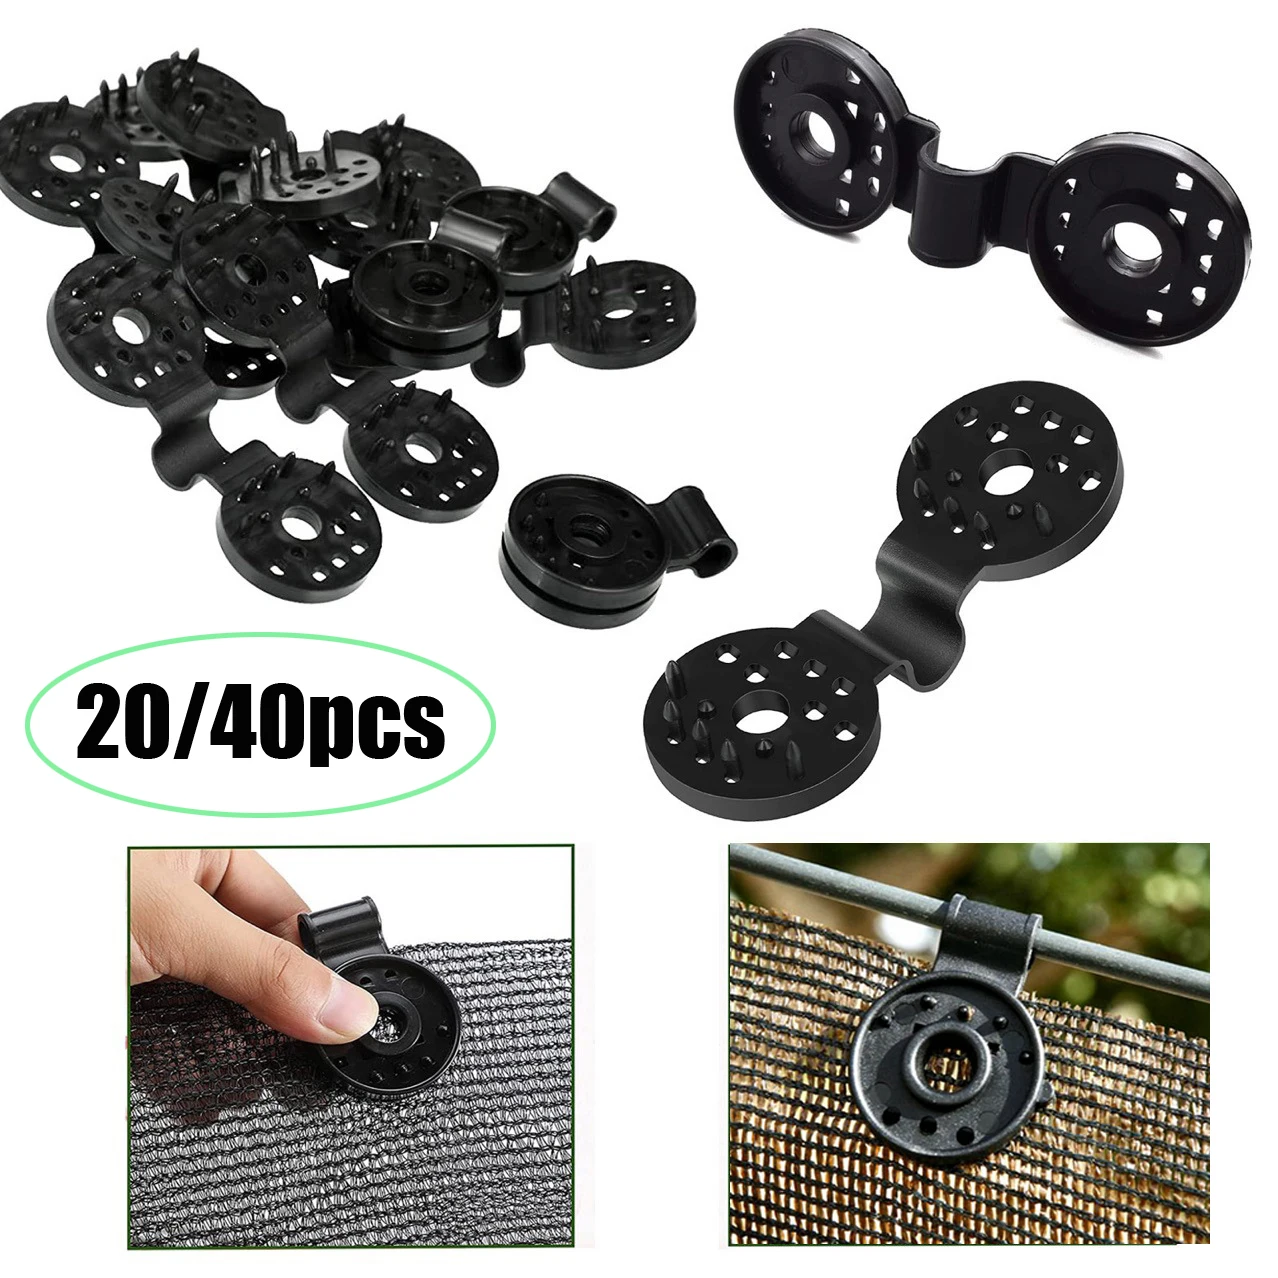 

20/40pcs Sun Shade Net Clip Garden Tools Greenhouse Shade Cloth Fix Clamp sun Shading net Clamps Plastic Grommet Fence Netting